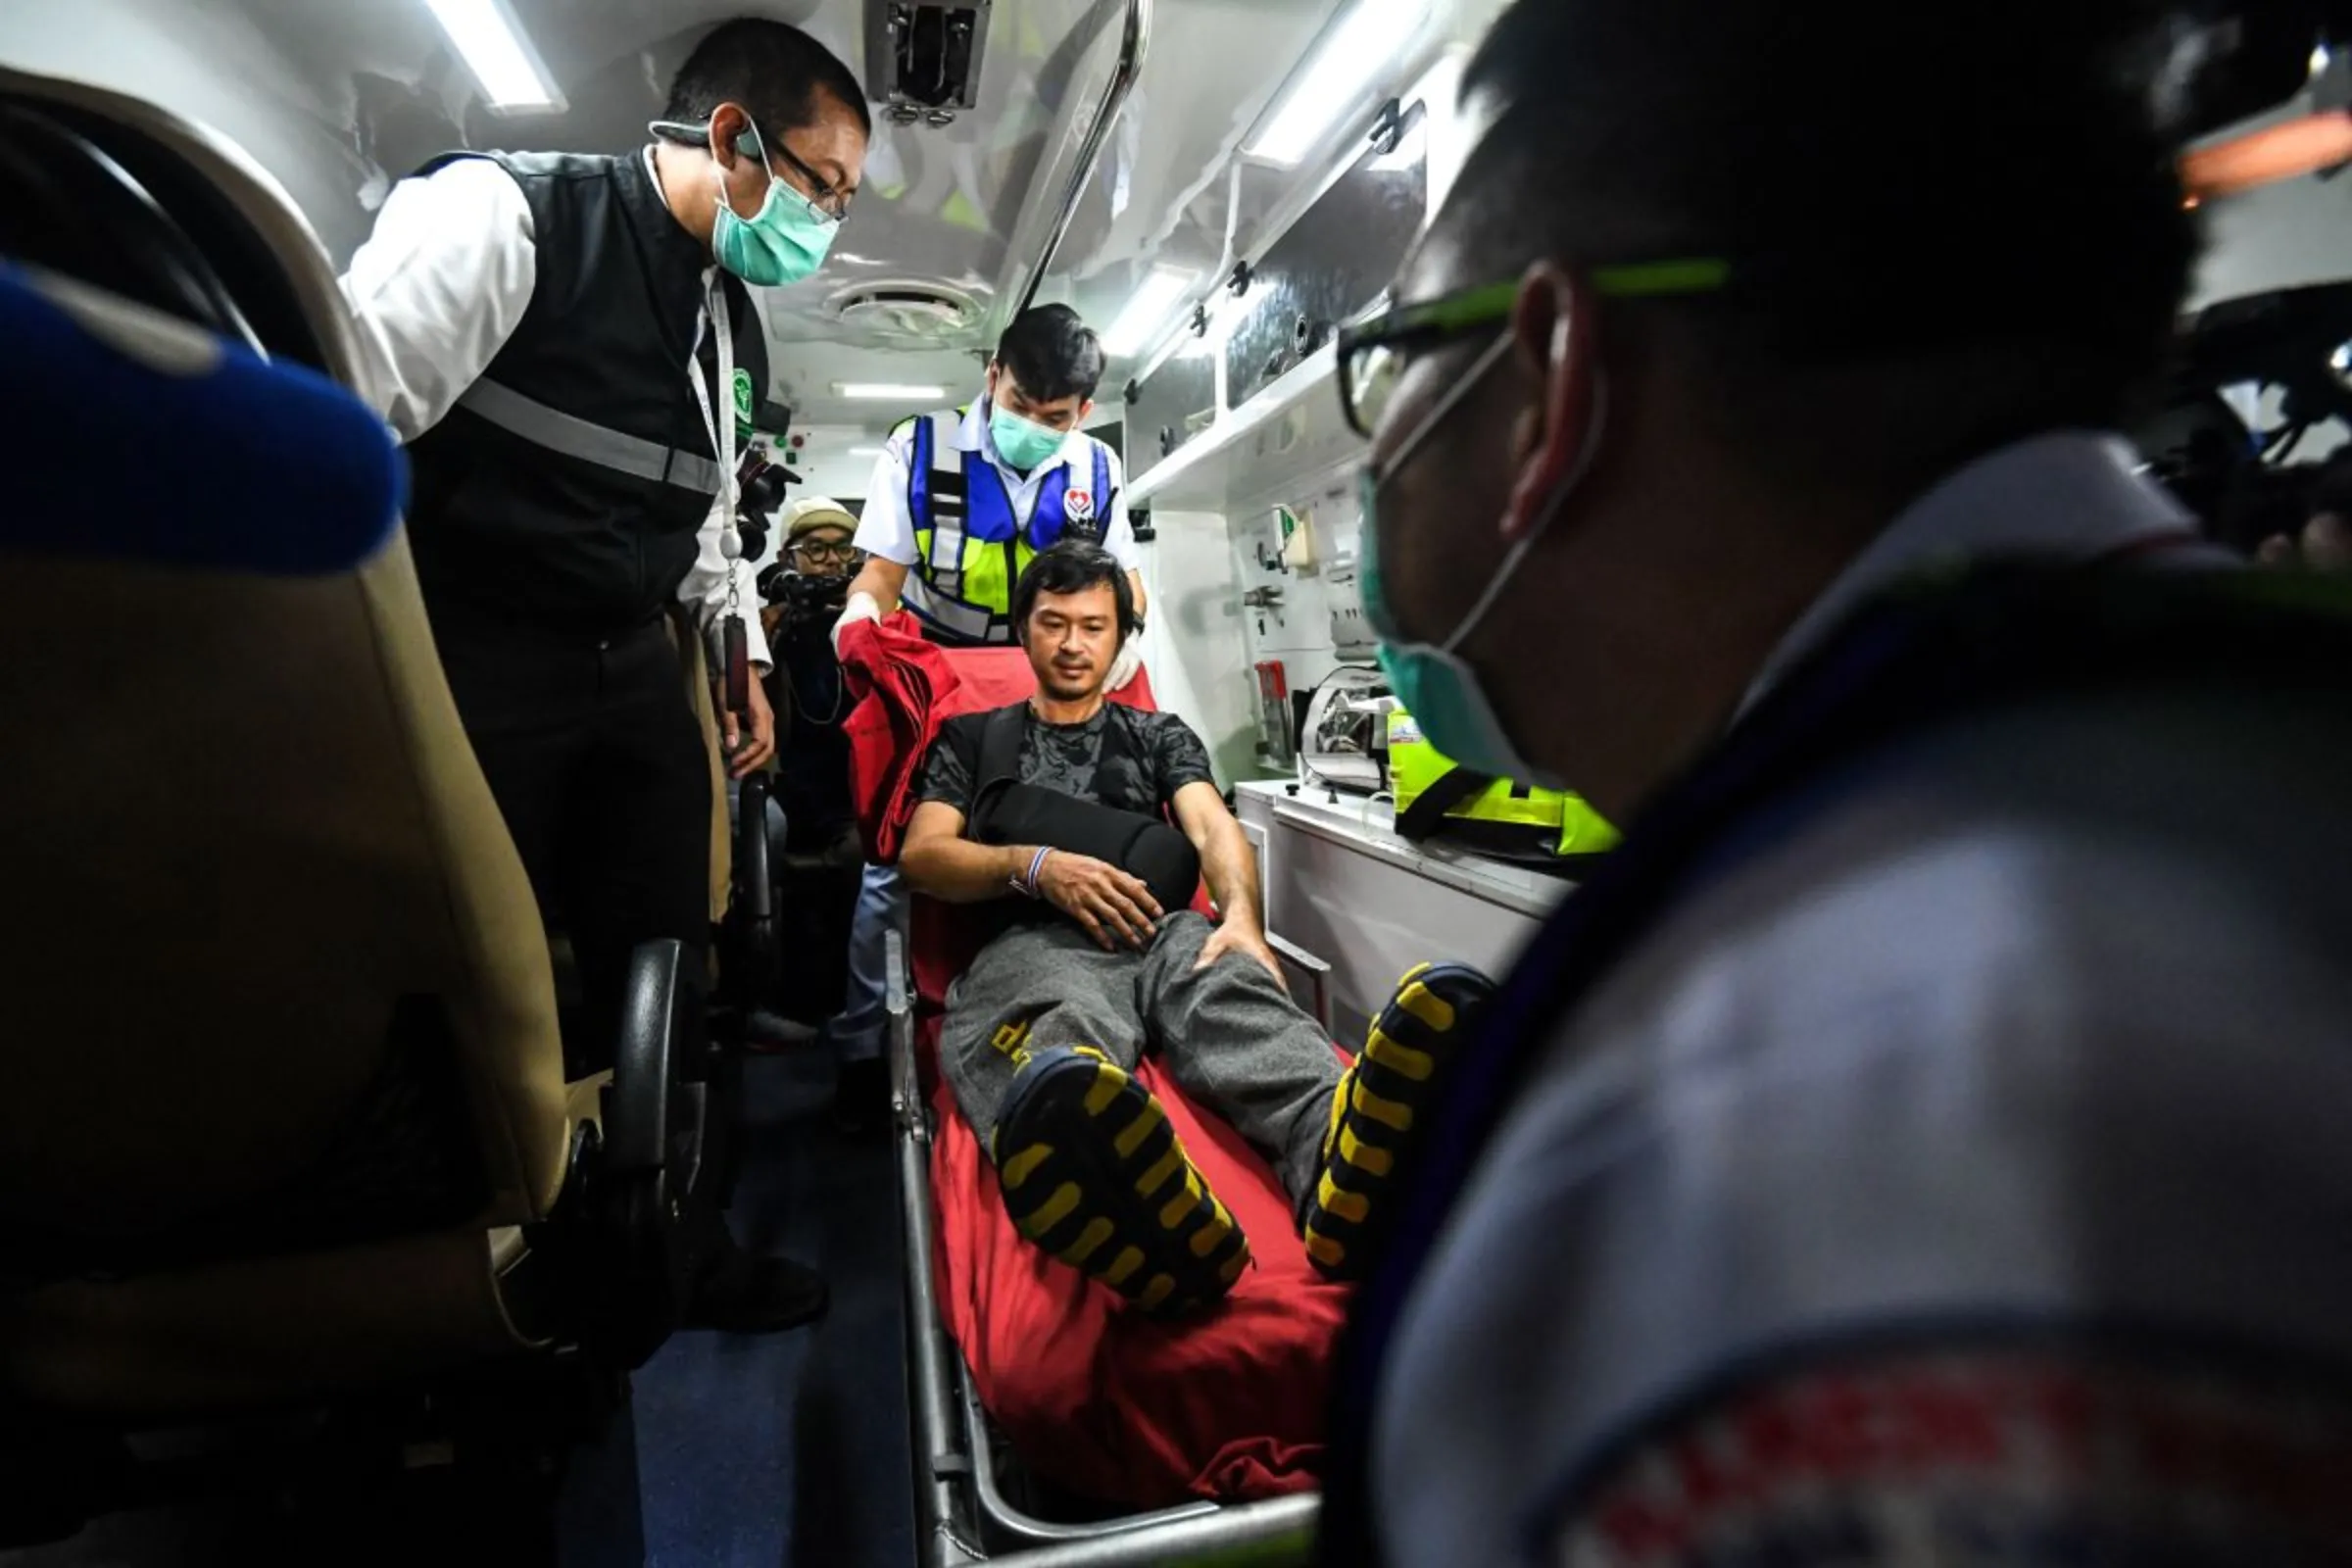 A migrant agricultural worker who was injured by a surprise attack on Israel by the Palestinian militant group Hamas, is helped by medical workers, as he arrives after being repatriated from Israel at Bangkok's Suvarnabhumi Airport, Thailand, October 12, 2023. REUTERS/Chalinee Thirasupa